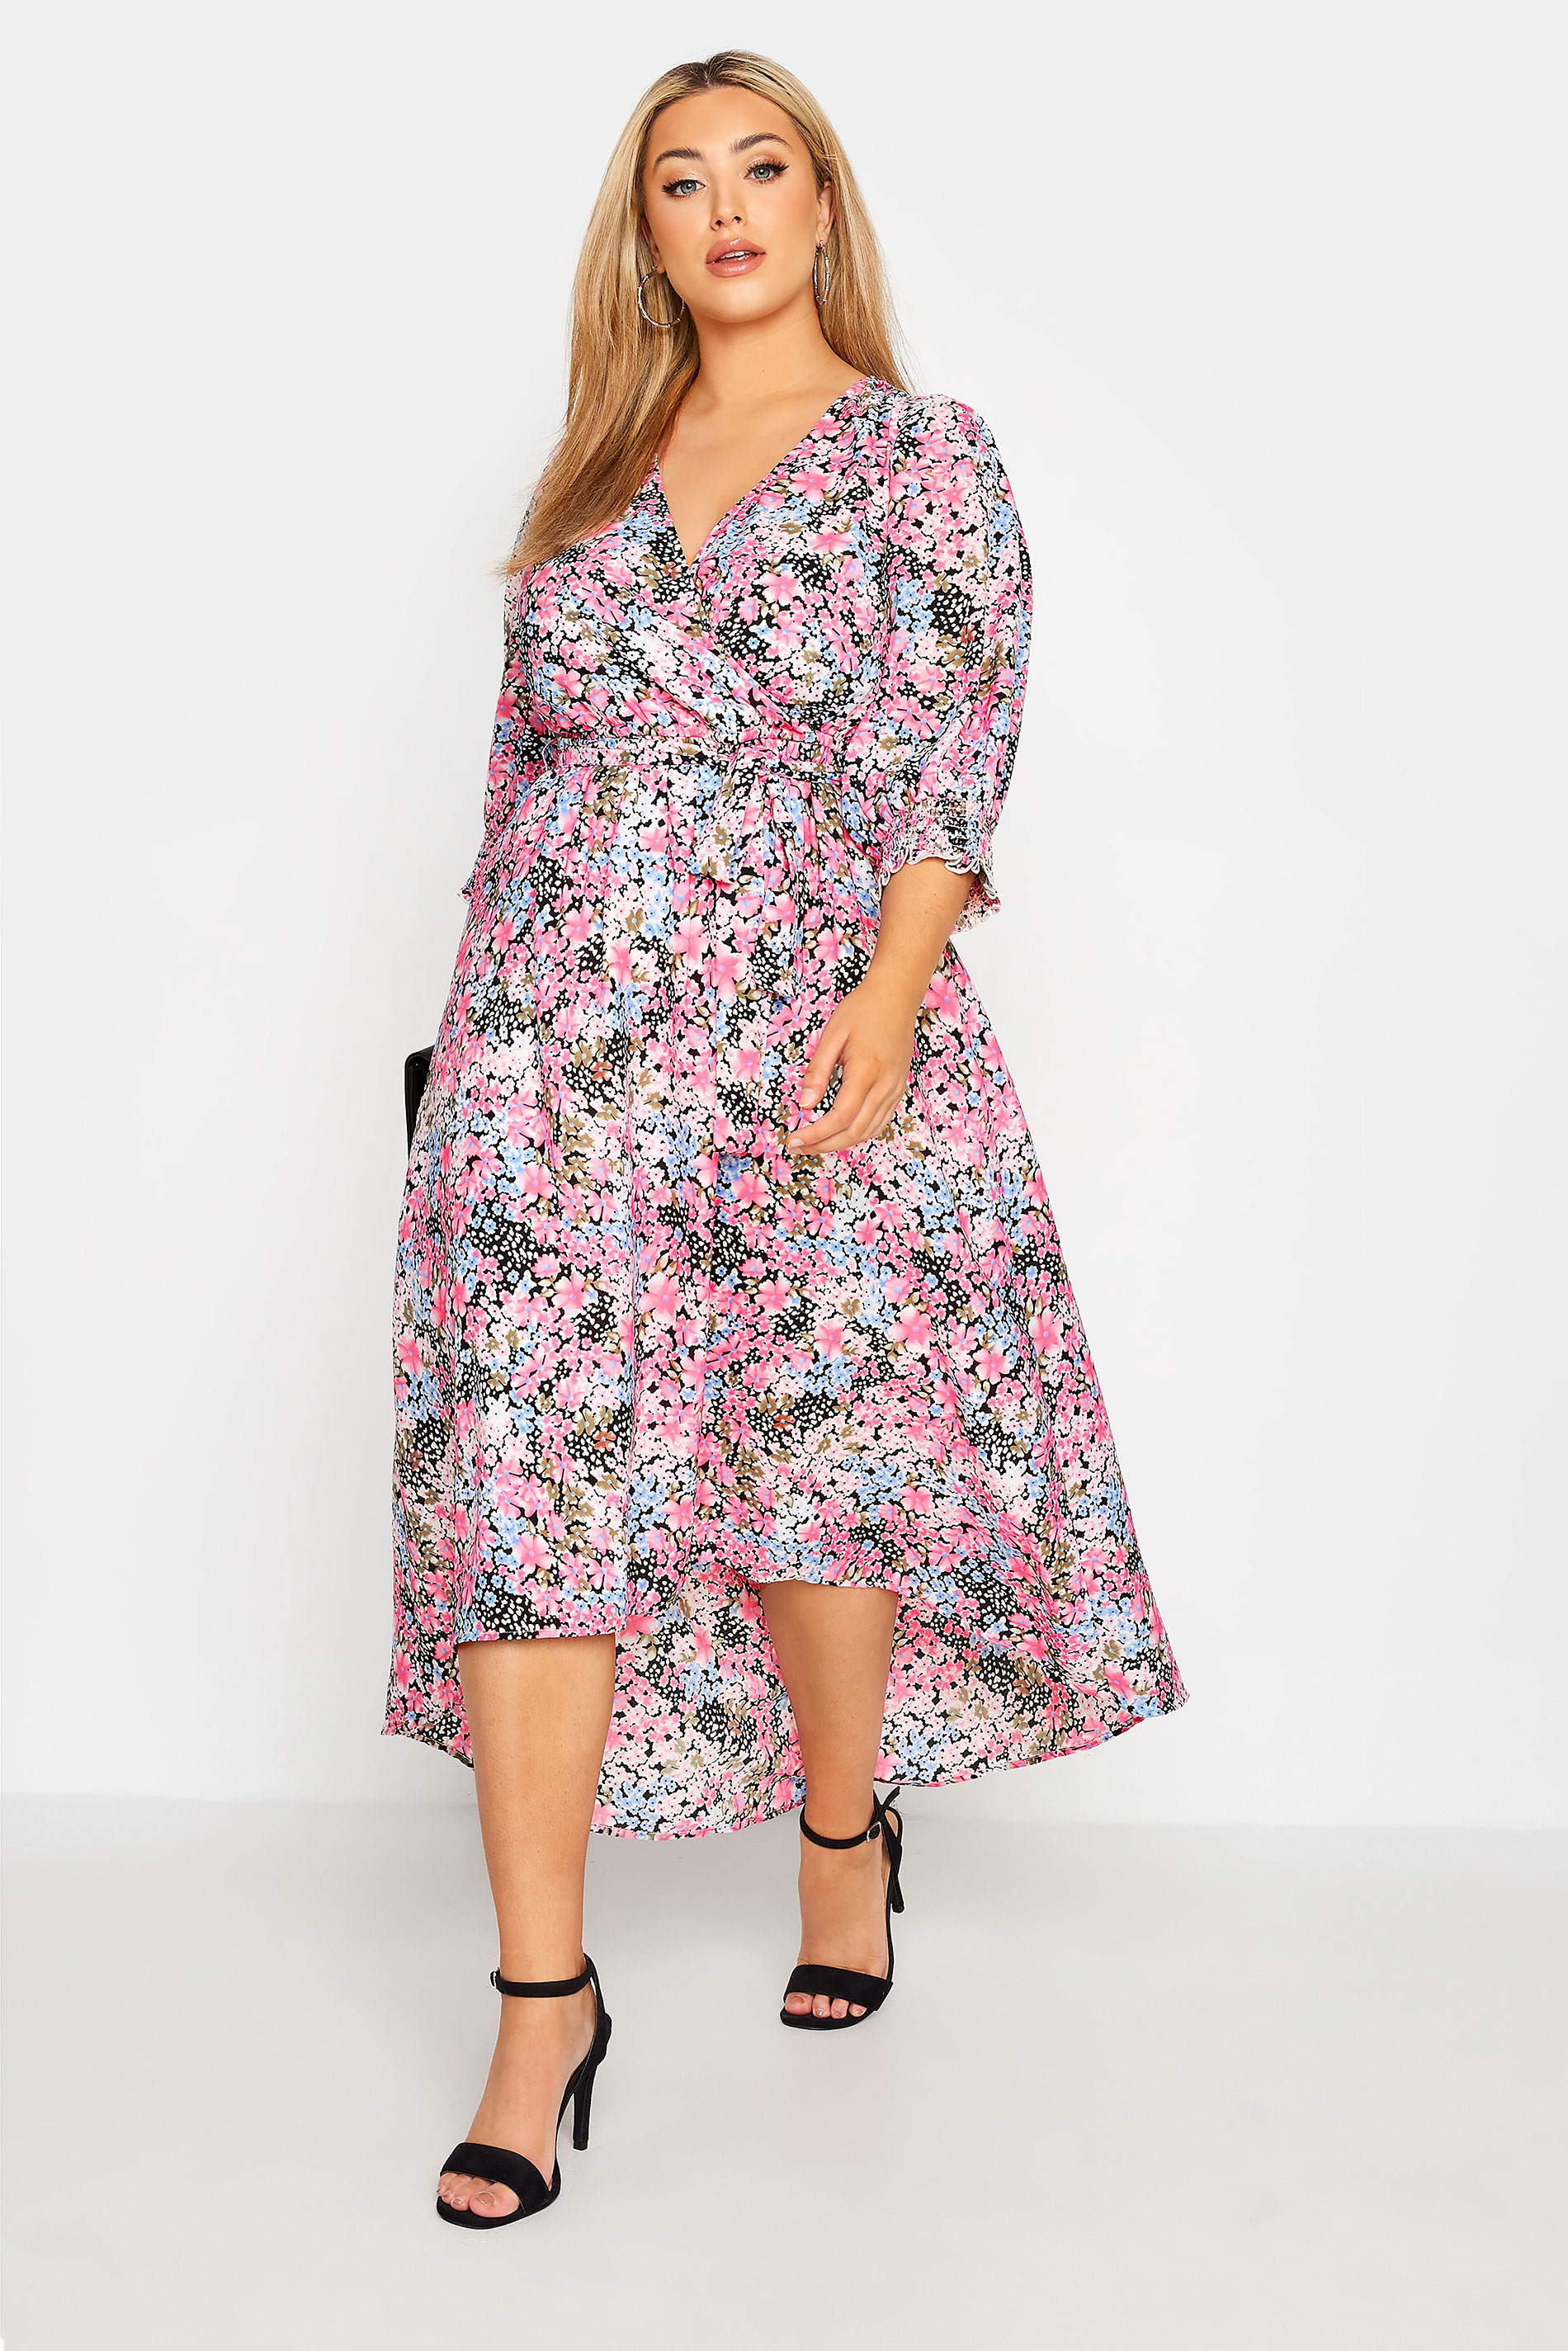 Robes Grande Taille Grande taille  Robes Portefeuilles | YOURS LONDON - Robe Rose Clair Floral Ourlet Plongeant - XJ86010